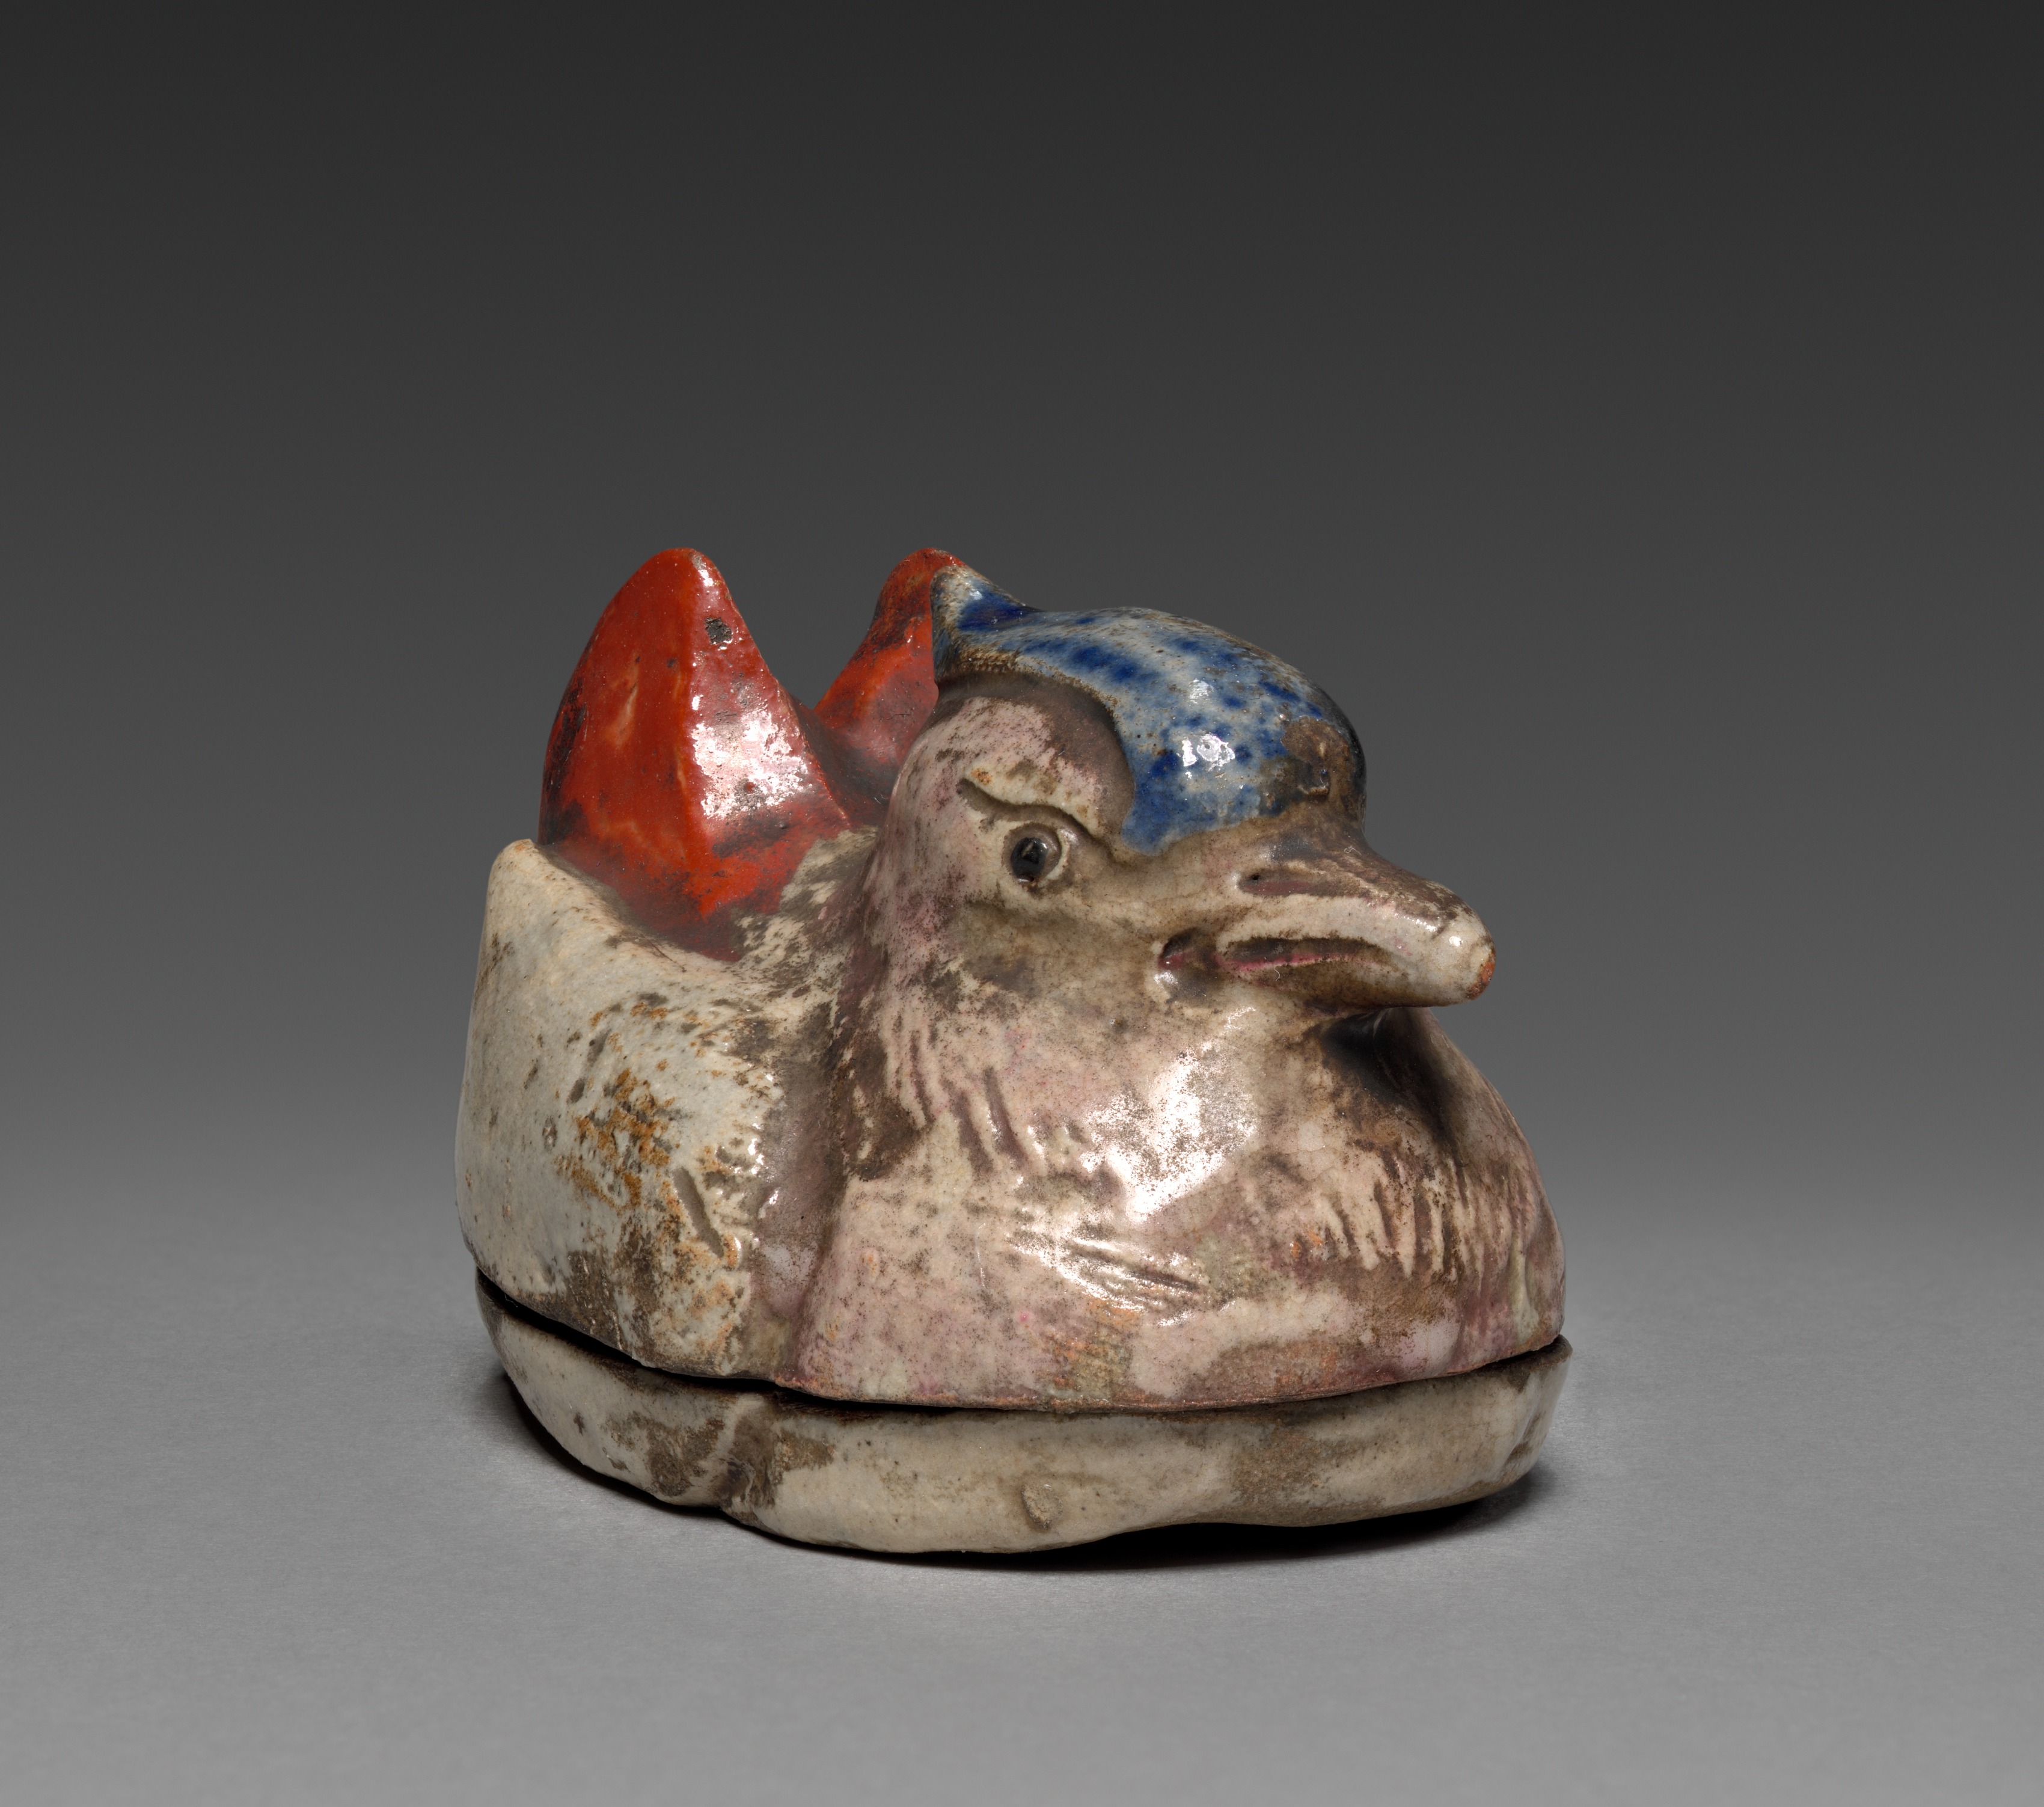 Incense Container (Kōgō) in the Shape of a Mandarin Duck